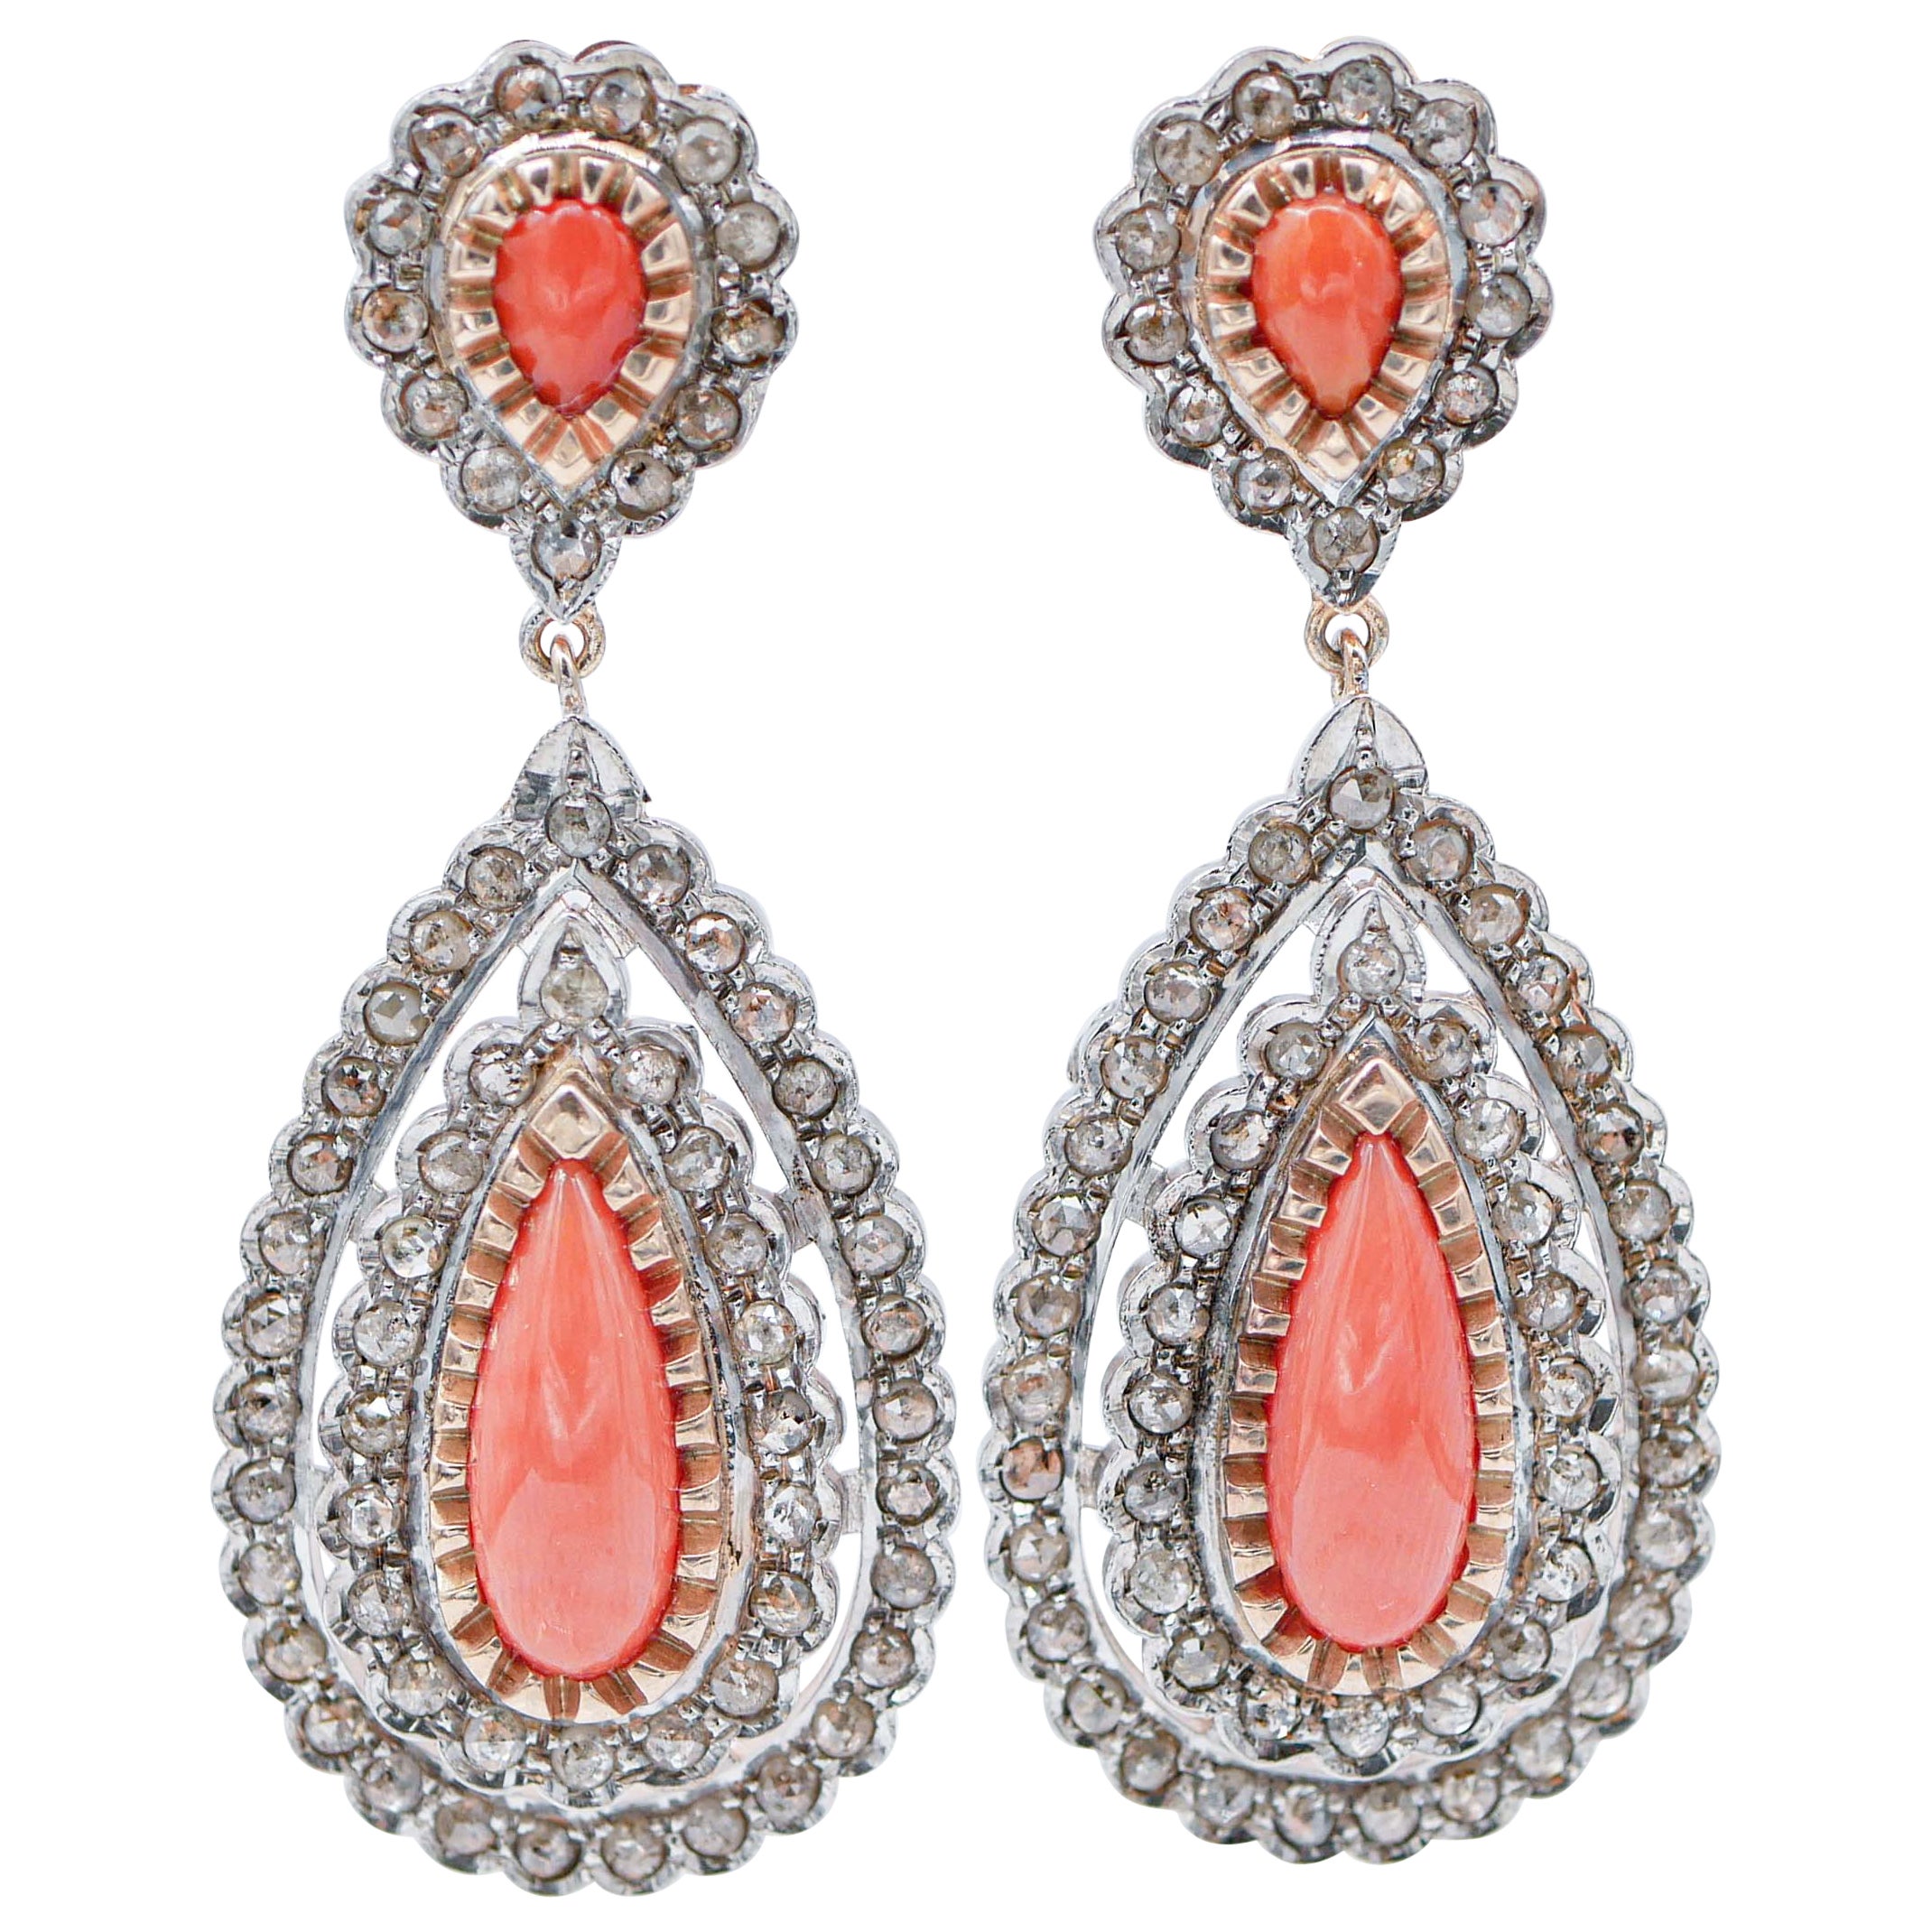 Coral, Diamonds, Rose Gold and Silver Retrò Earrings